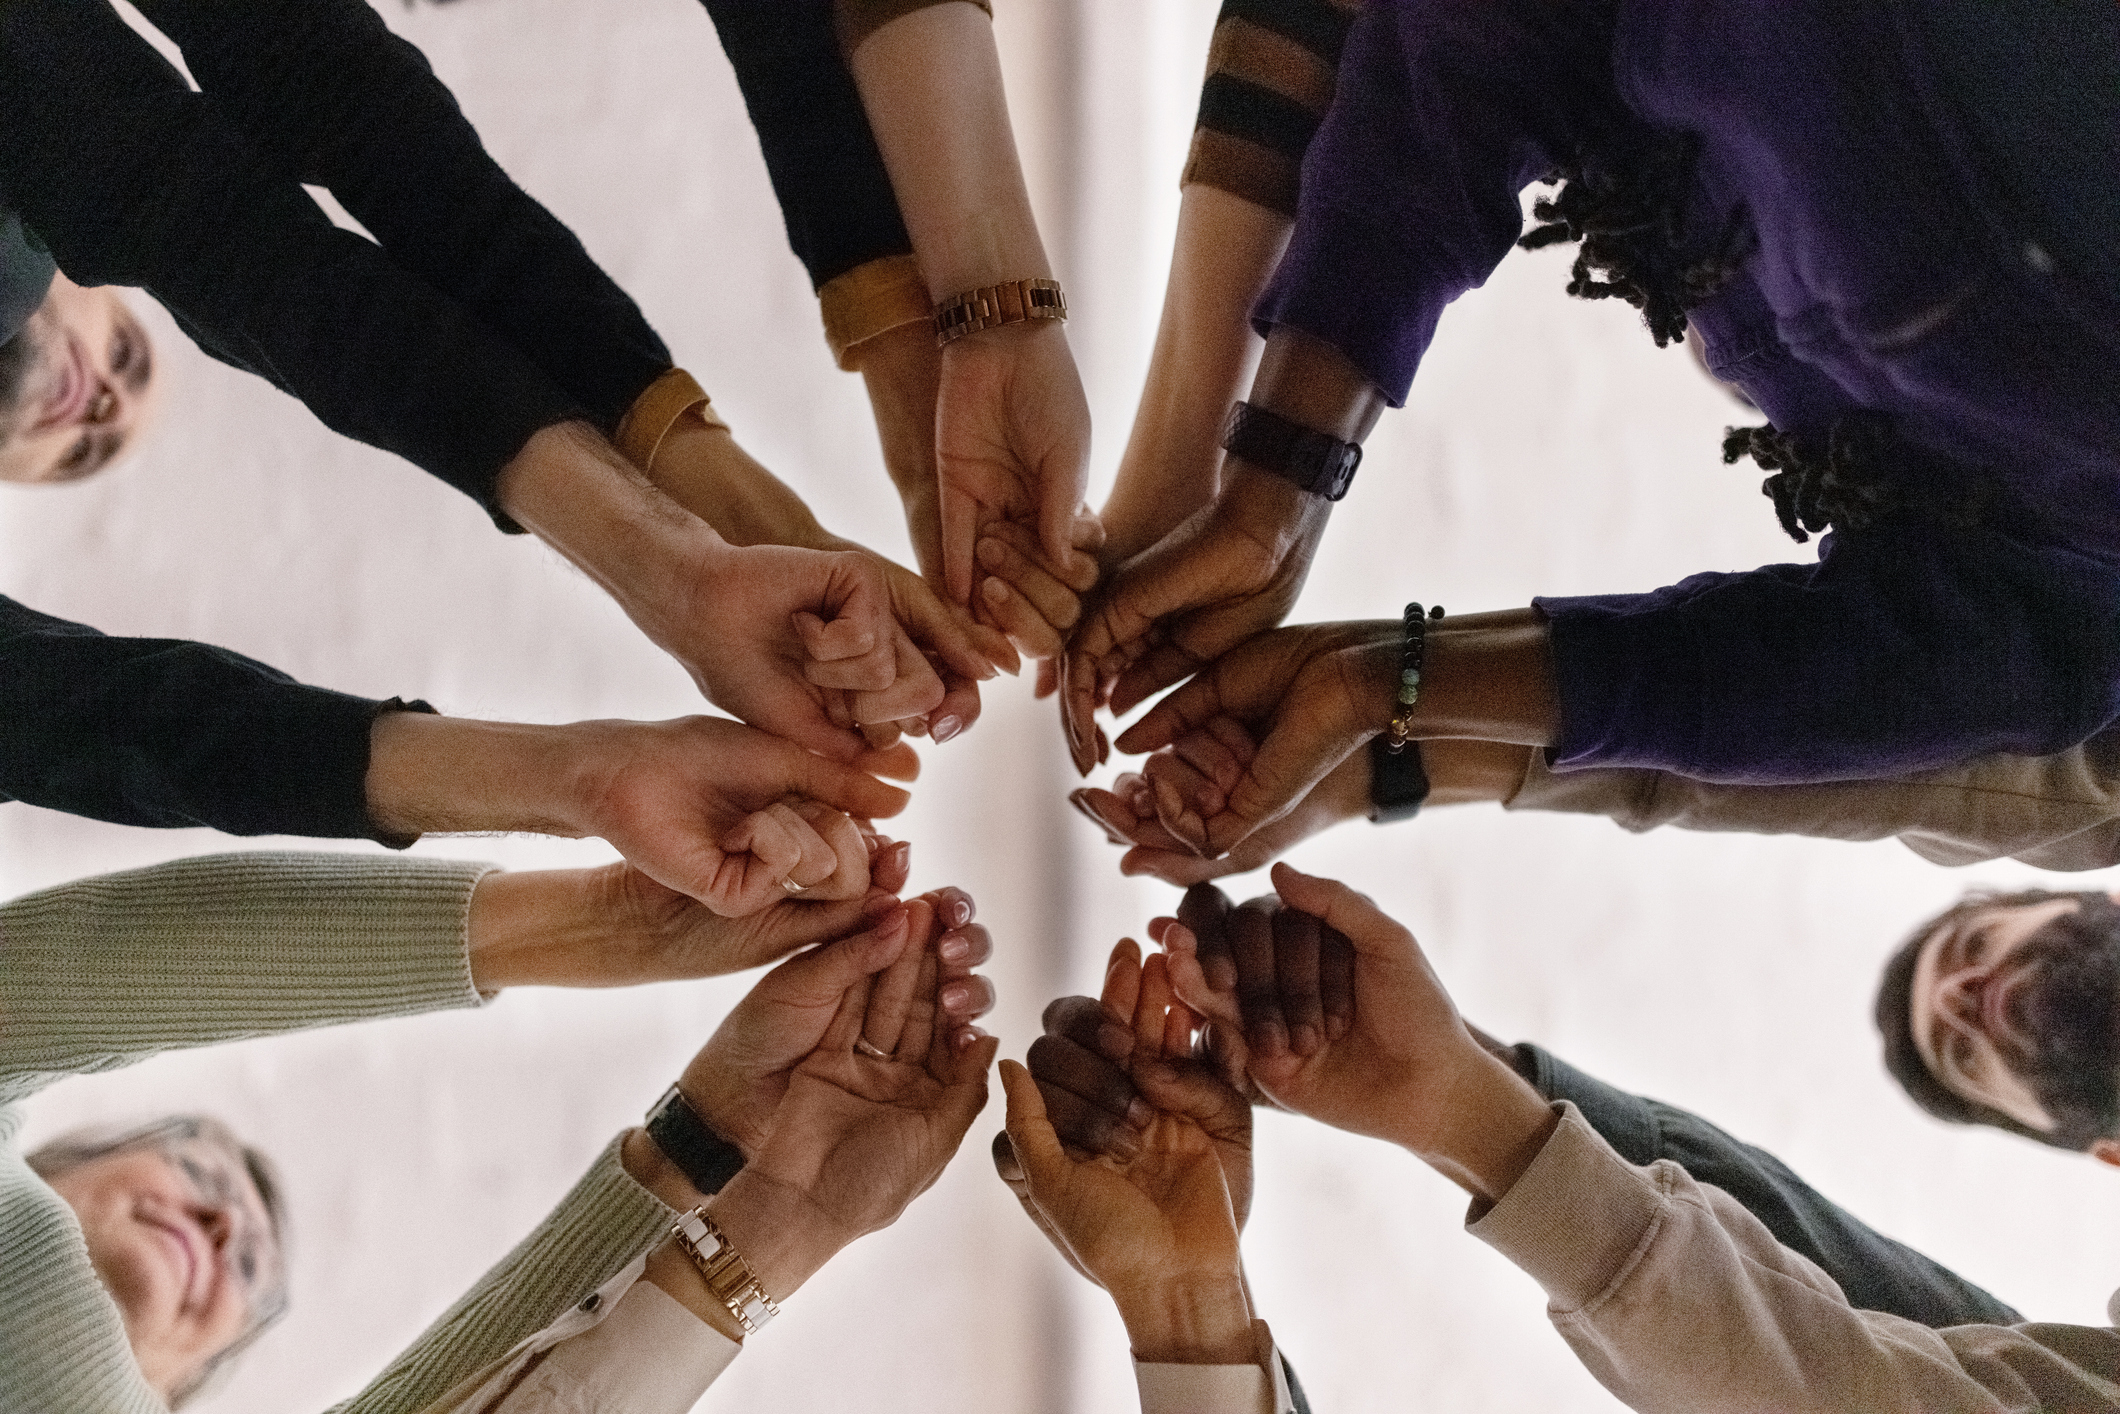 Group of people standing in a circle with their hands together in the middle, suggesting teamwork or unity